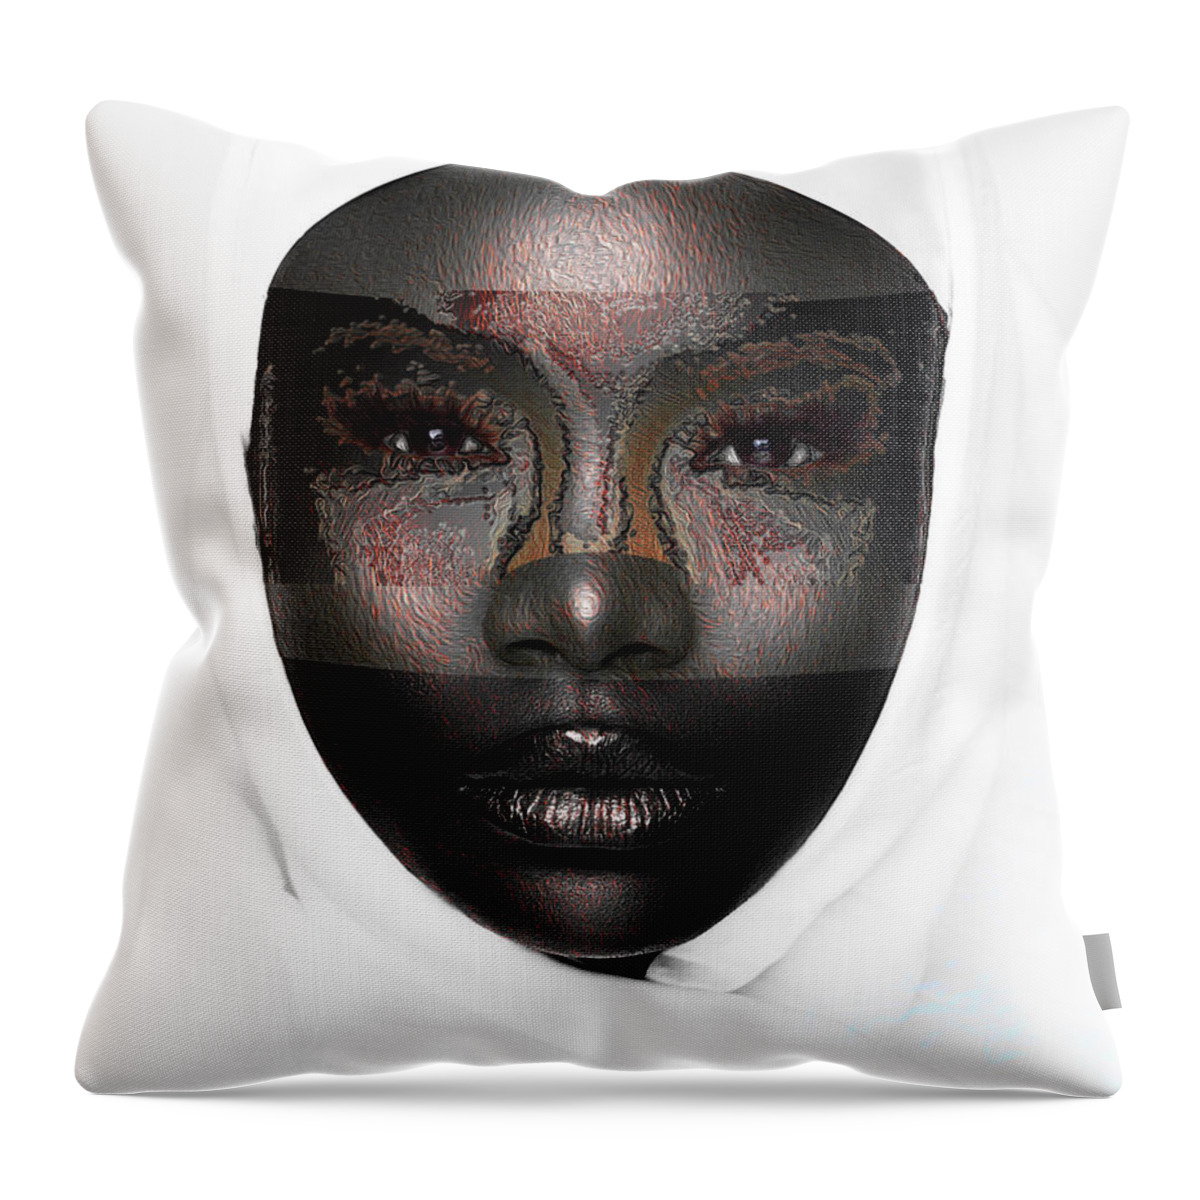 Shades Collection 1 Throw Pillow featuring the digital art Shades of Me 3 by Aldane Wynter